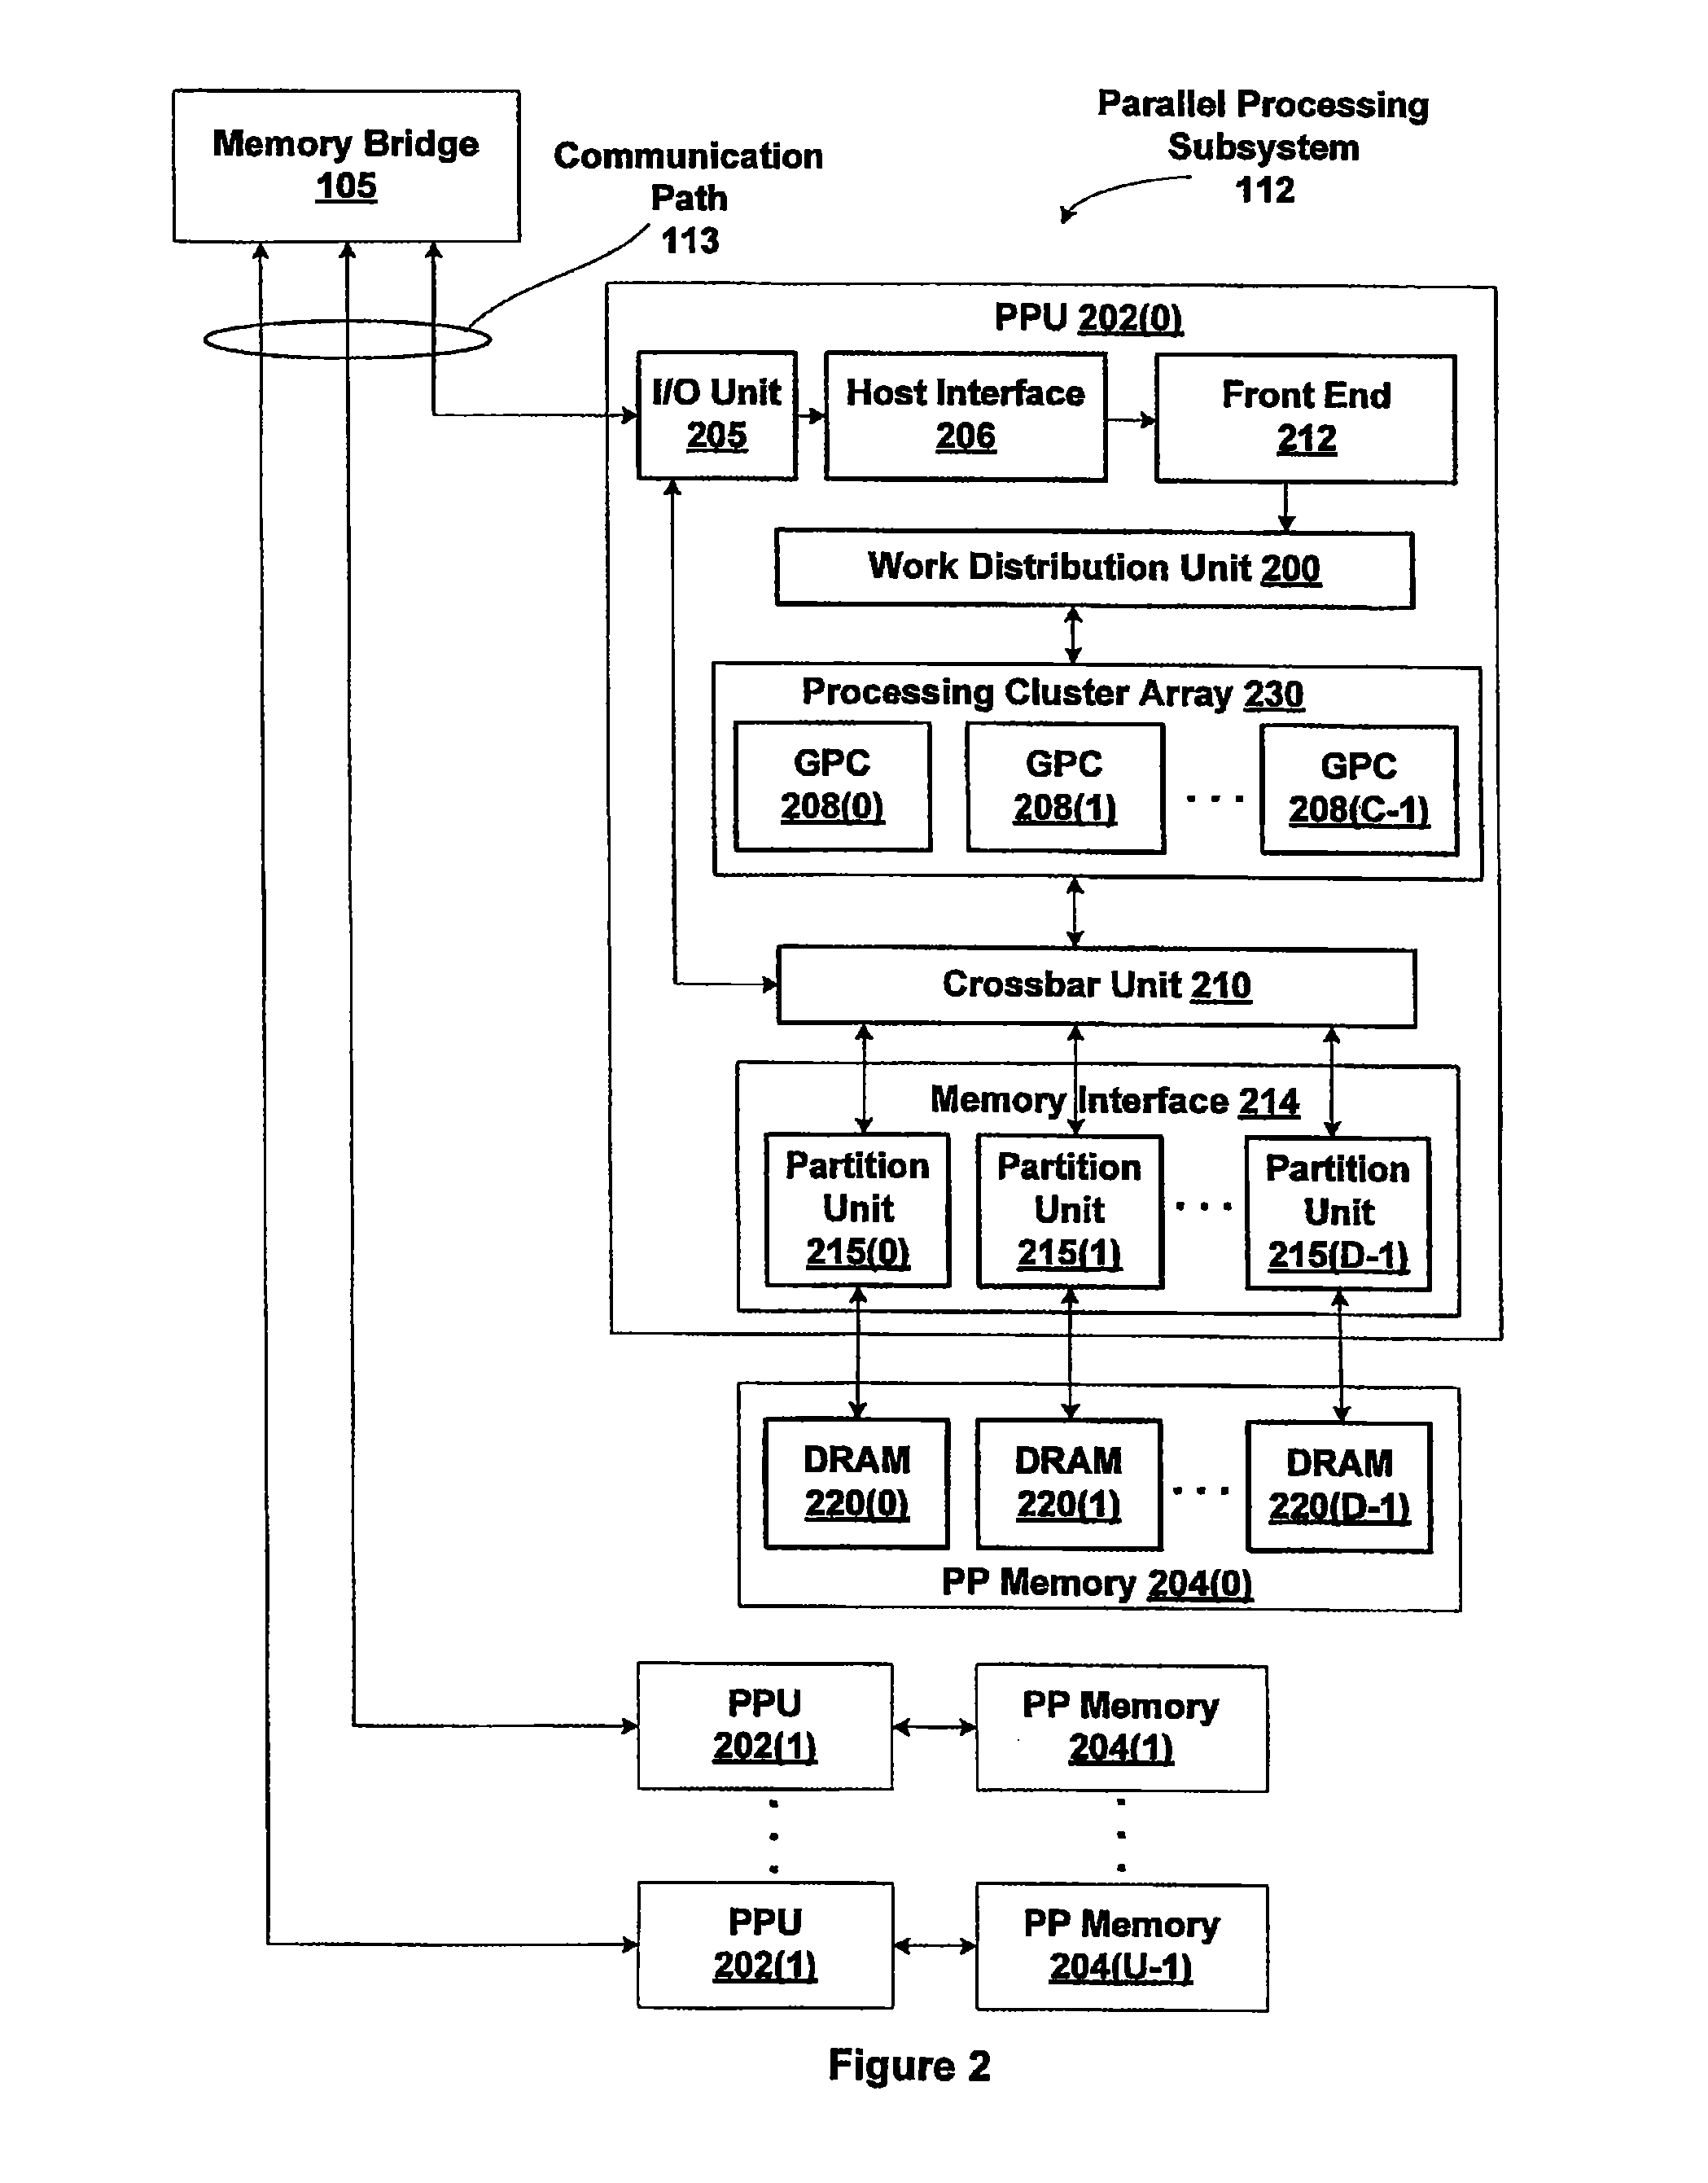 Cache-based control of atomic operations in conjunction with an external ALU block